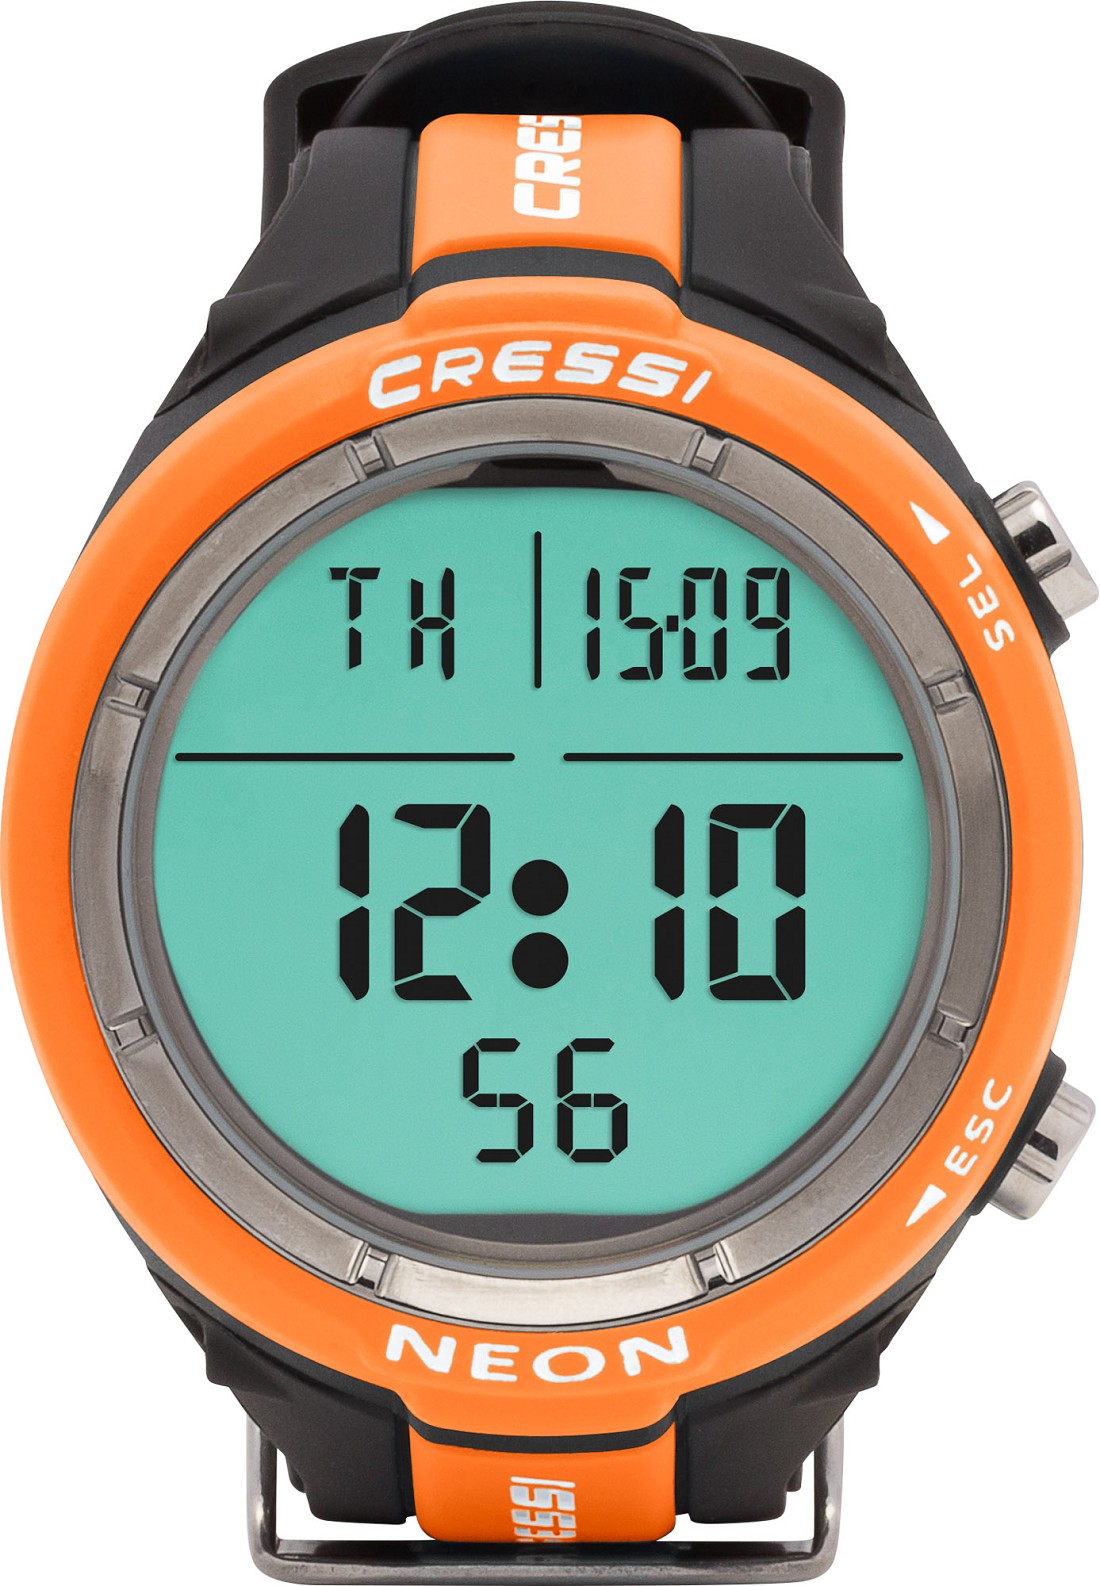 Cressi dive computer watch Neon buying cheap online by Dive Connection